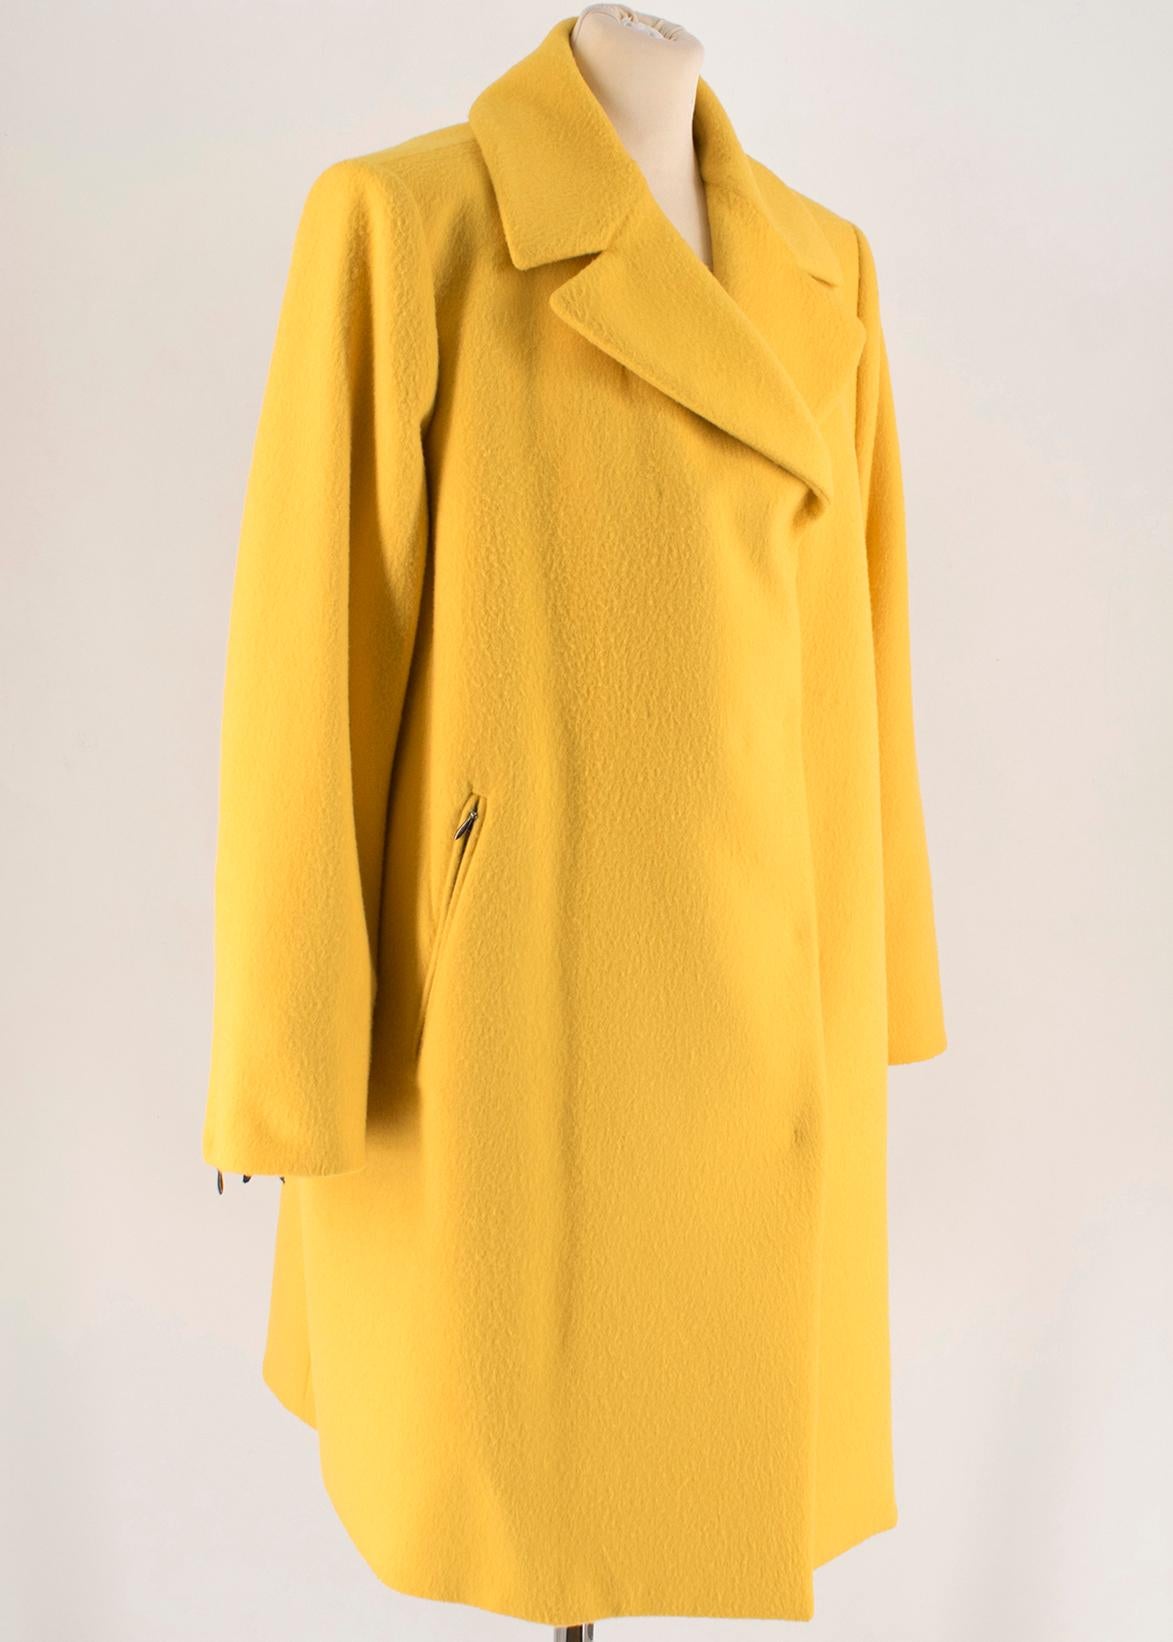 Sportmax Yellow Wool & Cashmere Zarda Coat
-Yellow, wool blend
-Double breasted 
-Two functional side zip pockets
-Zipped cuffs
-Back vent 
-Notch lapel 

Please note, these items are pre-owned and may show some signs of storage, even when unworn